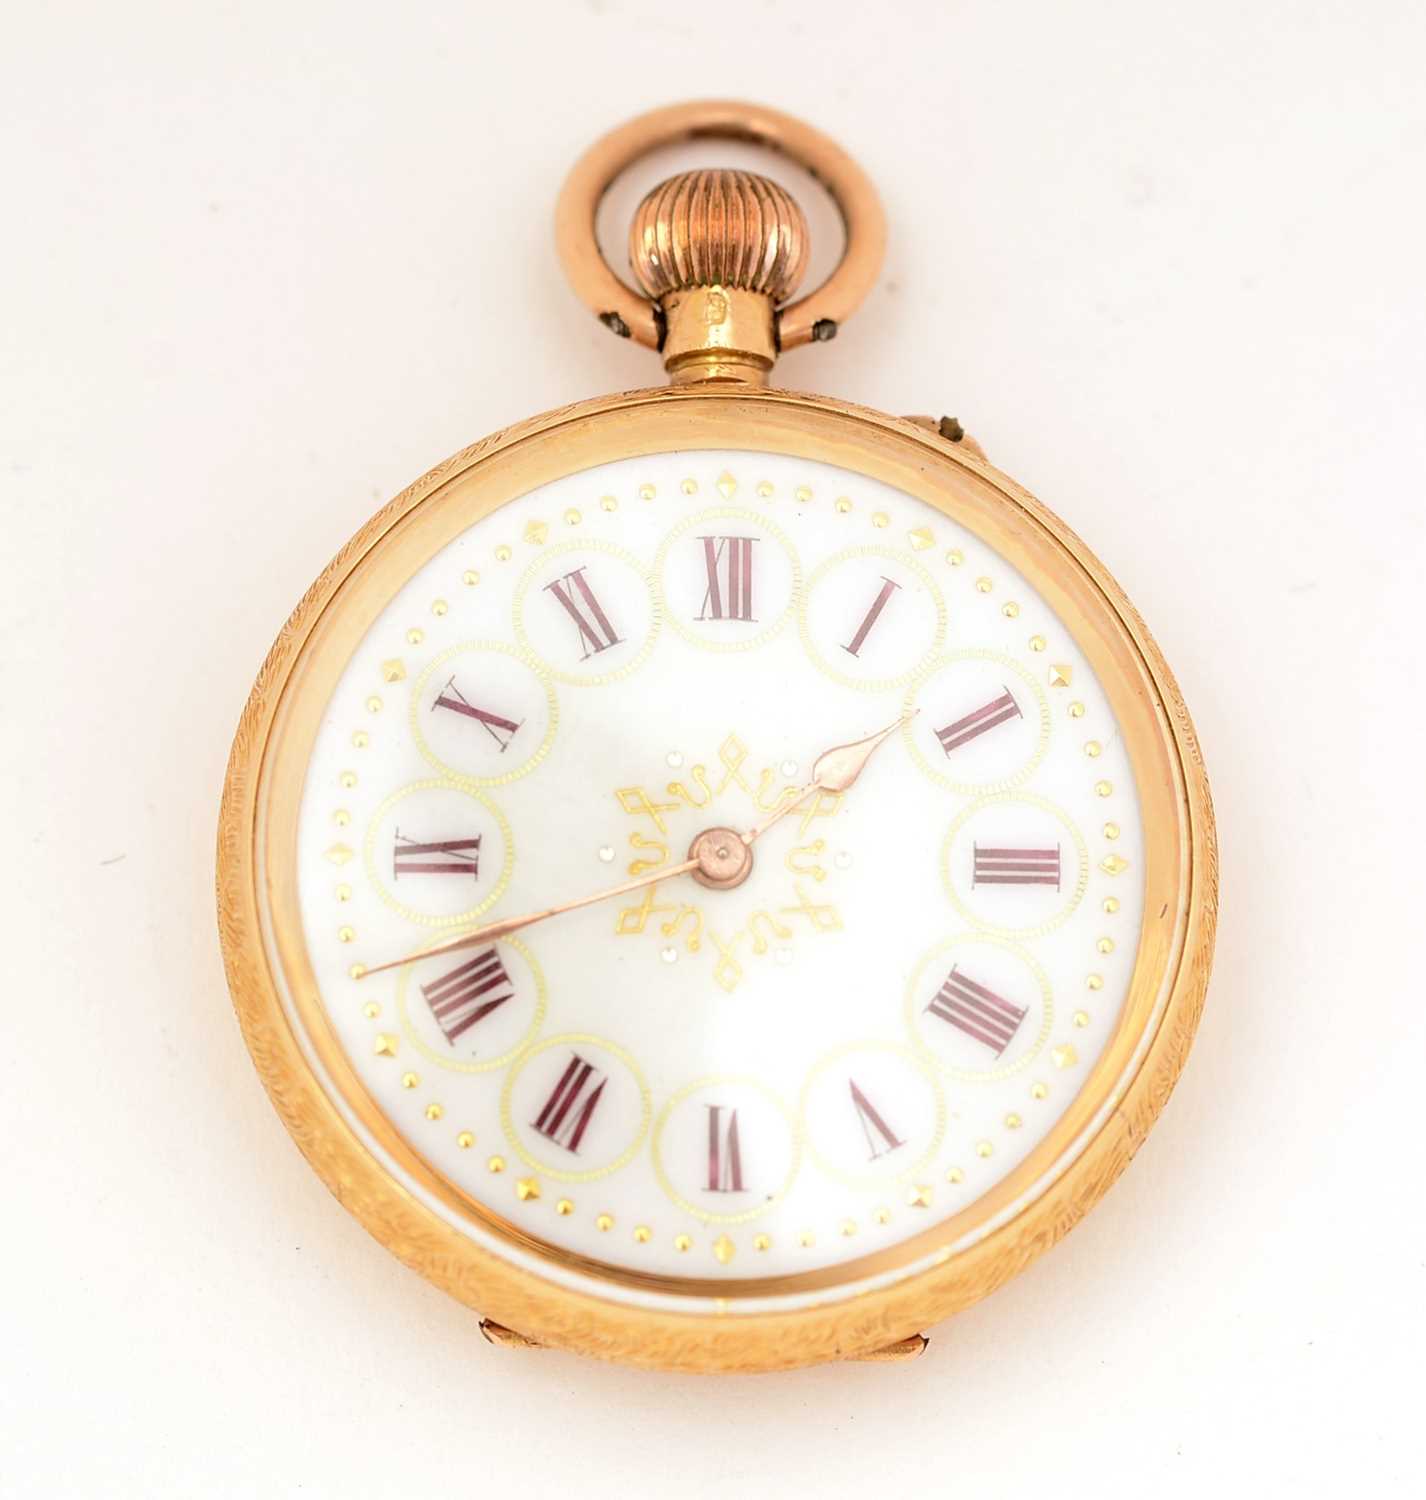 Lot 23 - An 18ct yellow gold cased open faced fob watch